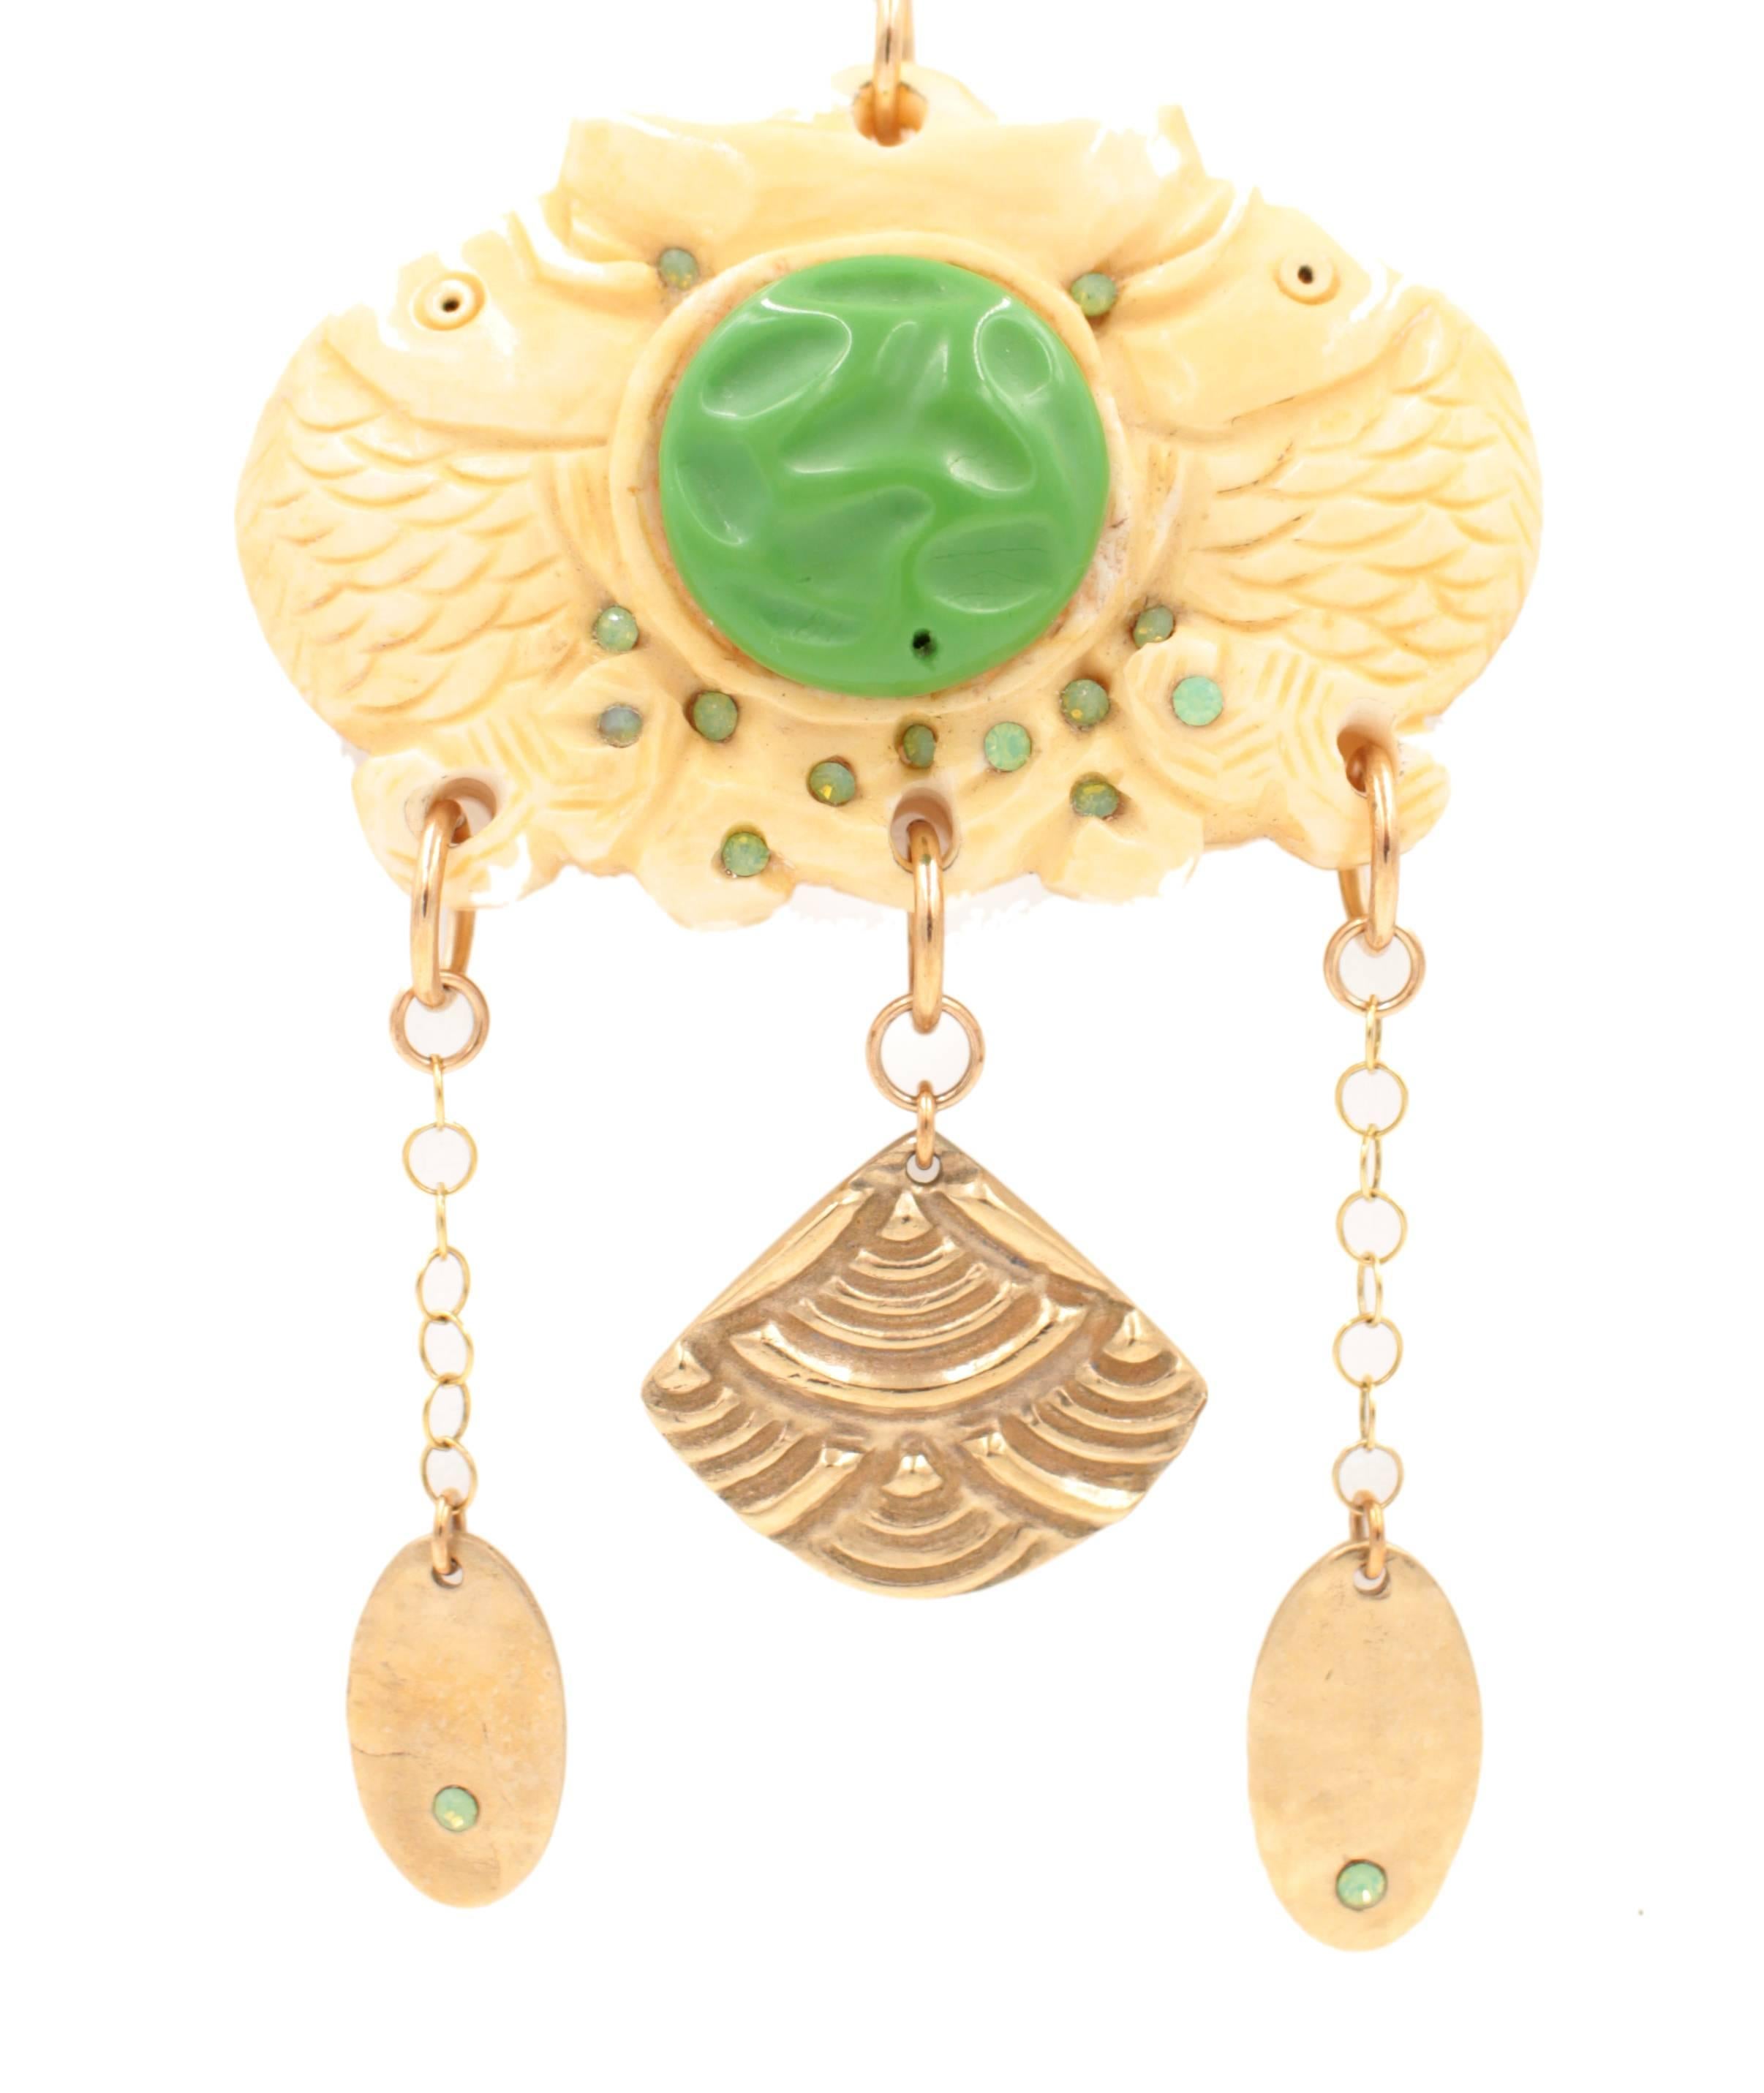 The Double Fish Pendant Necklace features a carved bone double fish with a delightful vintage green glass center set with vintage Swarovski Crystals accented by bronze clay dangles. The piece measures 26 x 2.5 in.